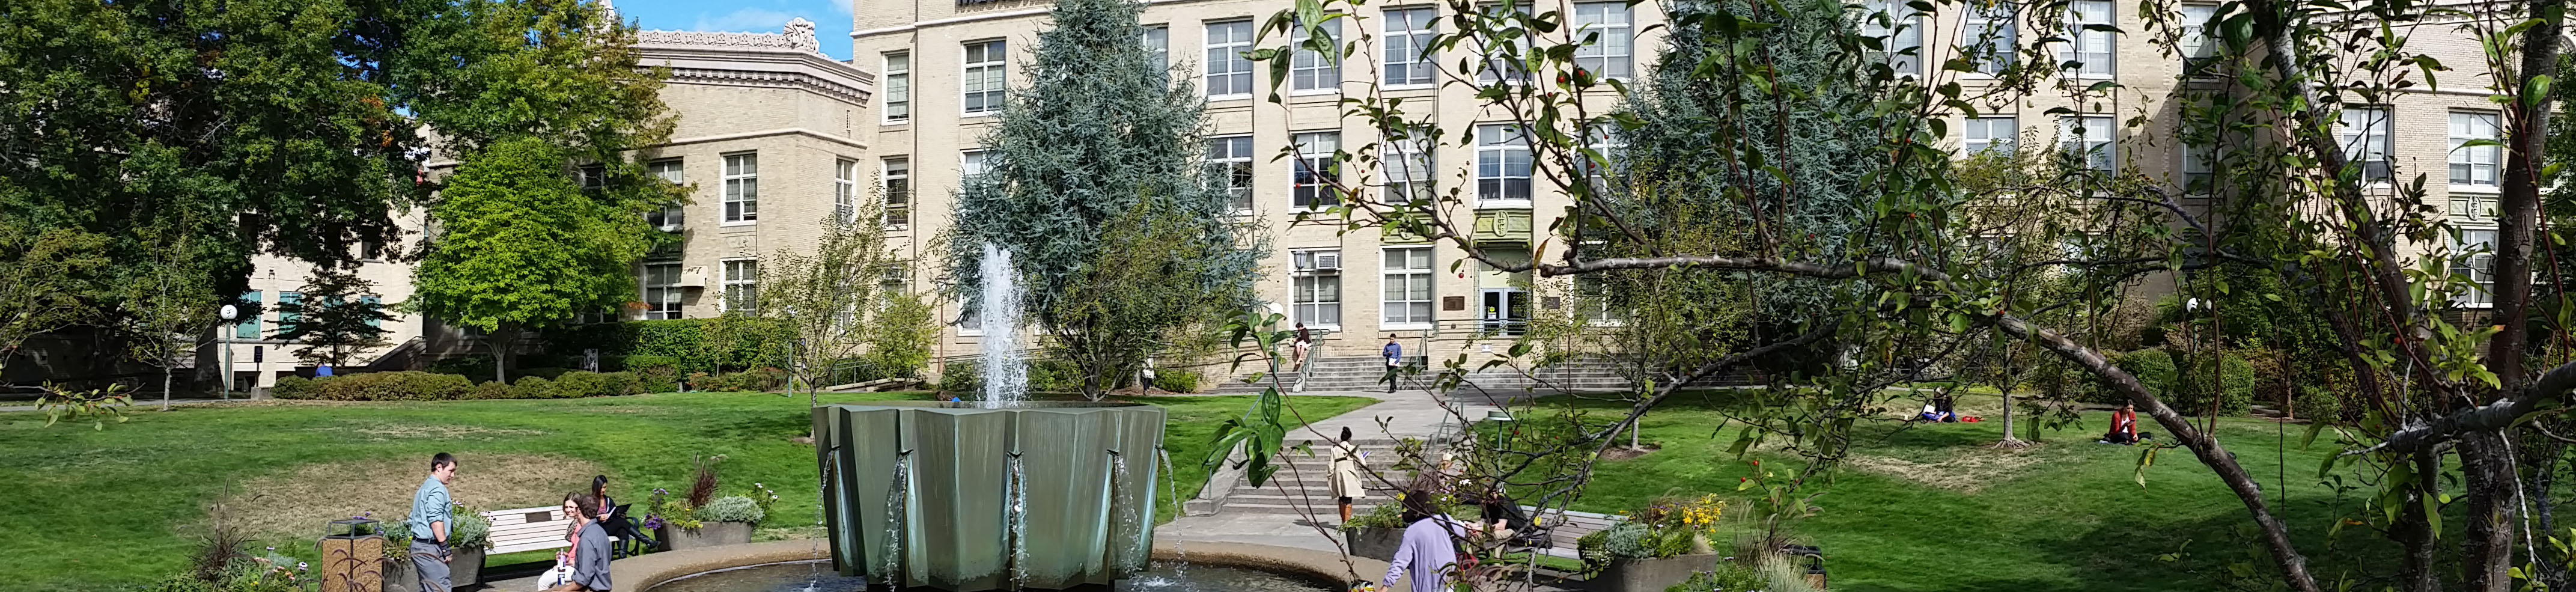 wide view of the Mac Hall fountain in the summer with people enjoying the sun